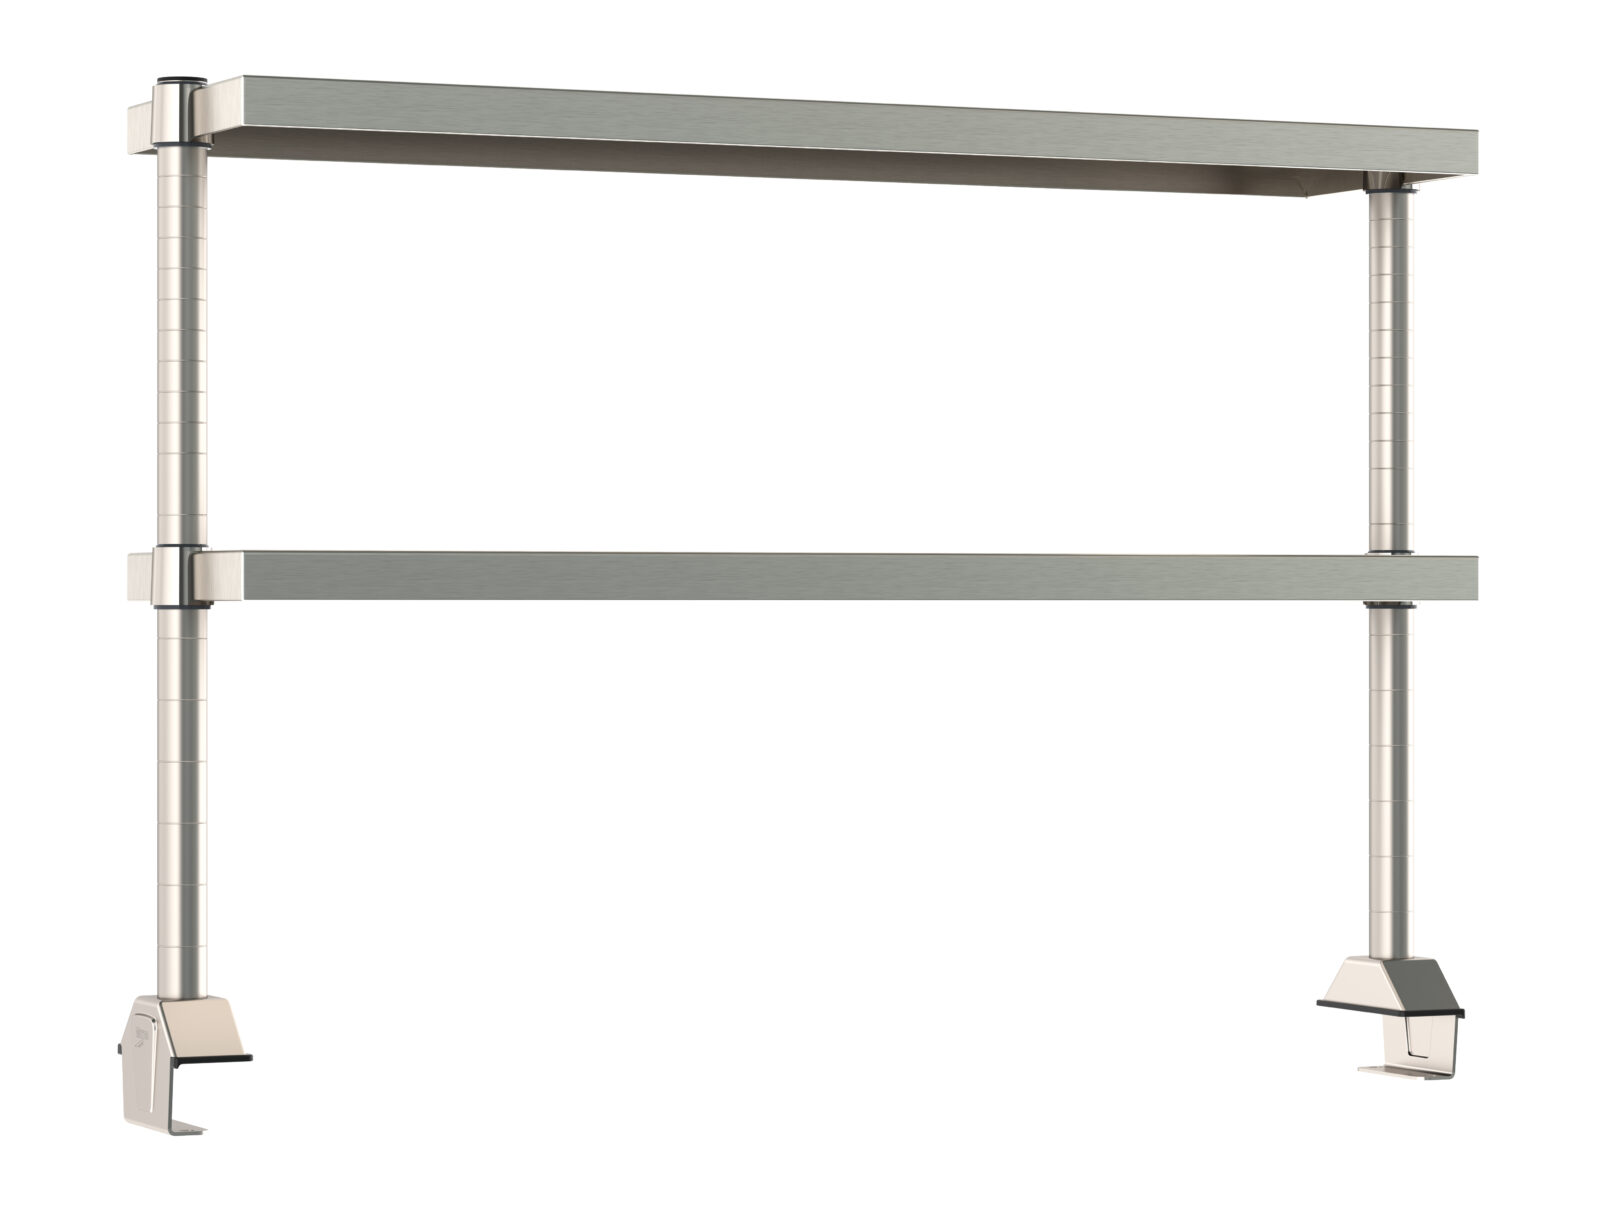 Metro Tableworx 2 Center Cantilever Stainless Steel Solid Shelf Risers